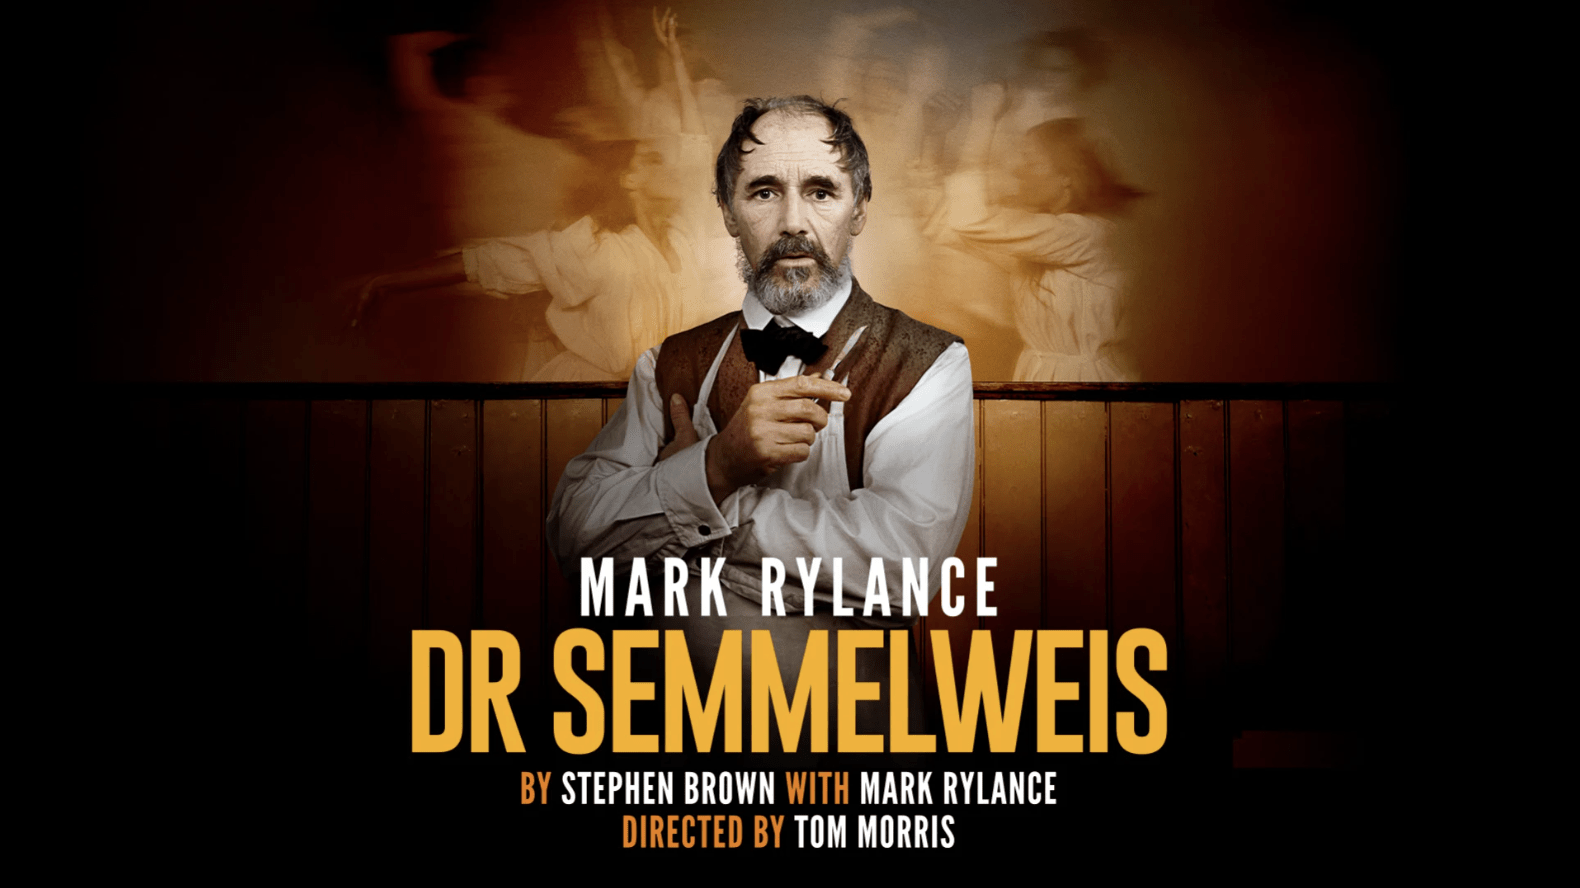 Mark Rylance returns to the West End as one of medicine’s greatest pioneers, maverick Hungarian doctor Ignaz Semmelweis